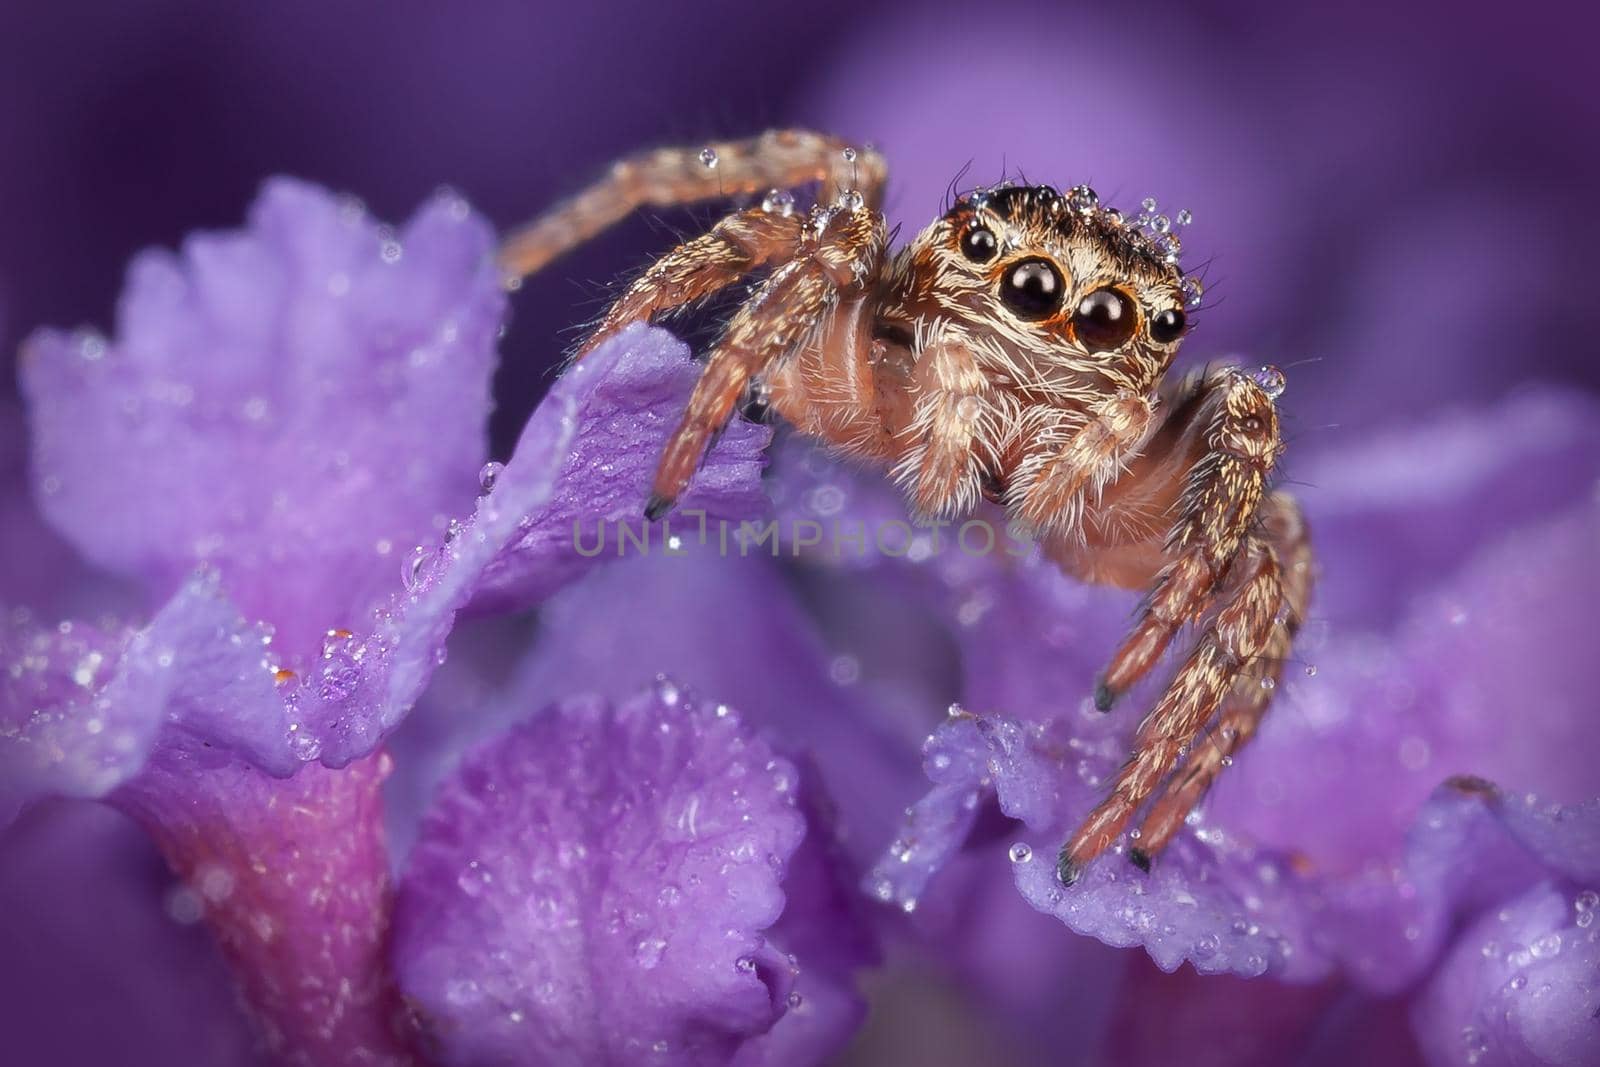 Jumping spider all covered with dew drops on the nice purple flower